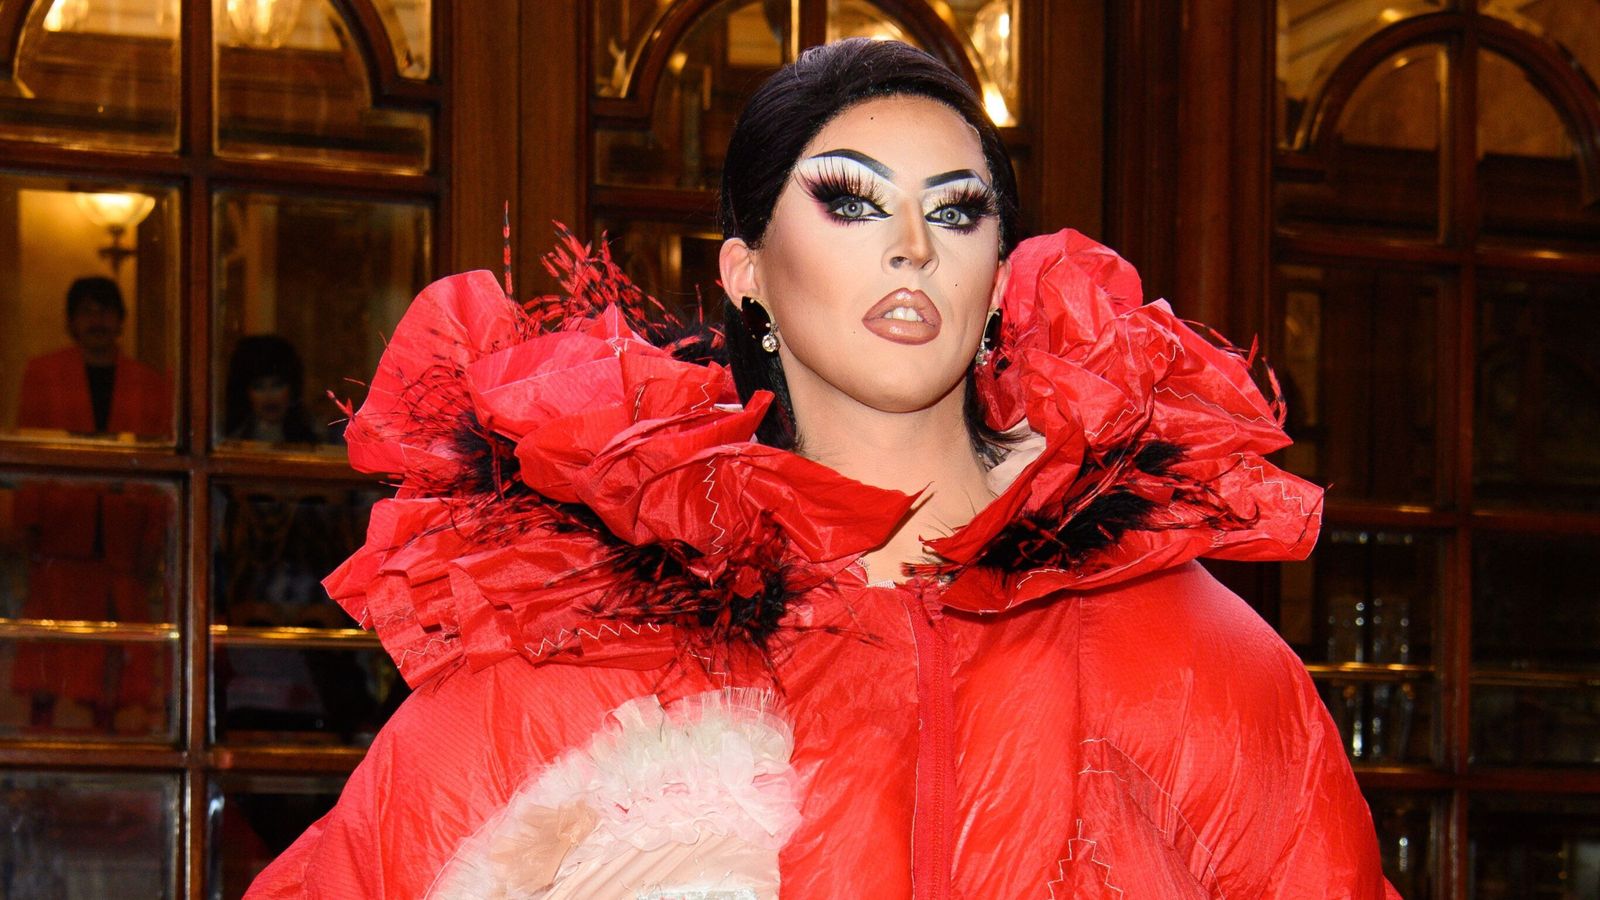 Drag star Cherry Valentine, who starred in UK’s RuPaul’s Drag Race, dies aged 28 | Ents & Arts News